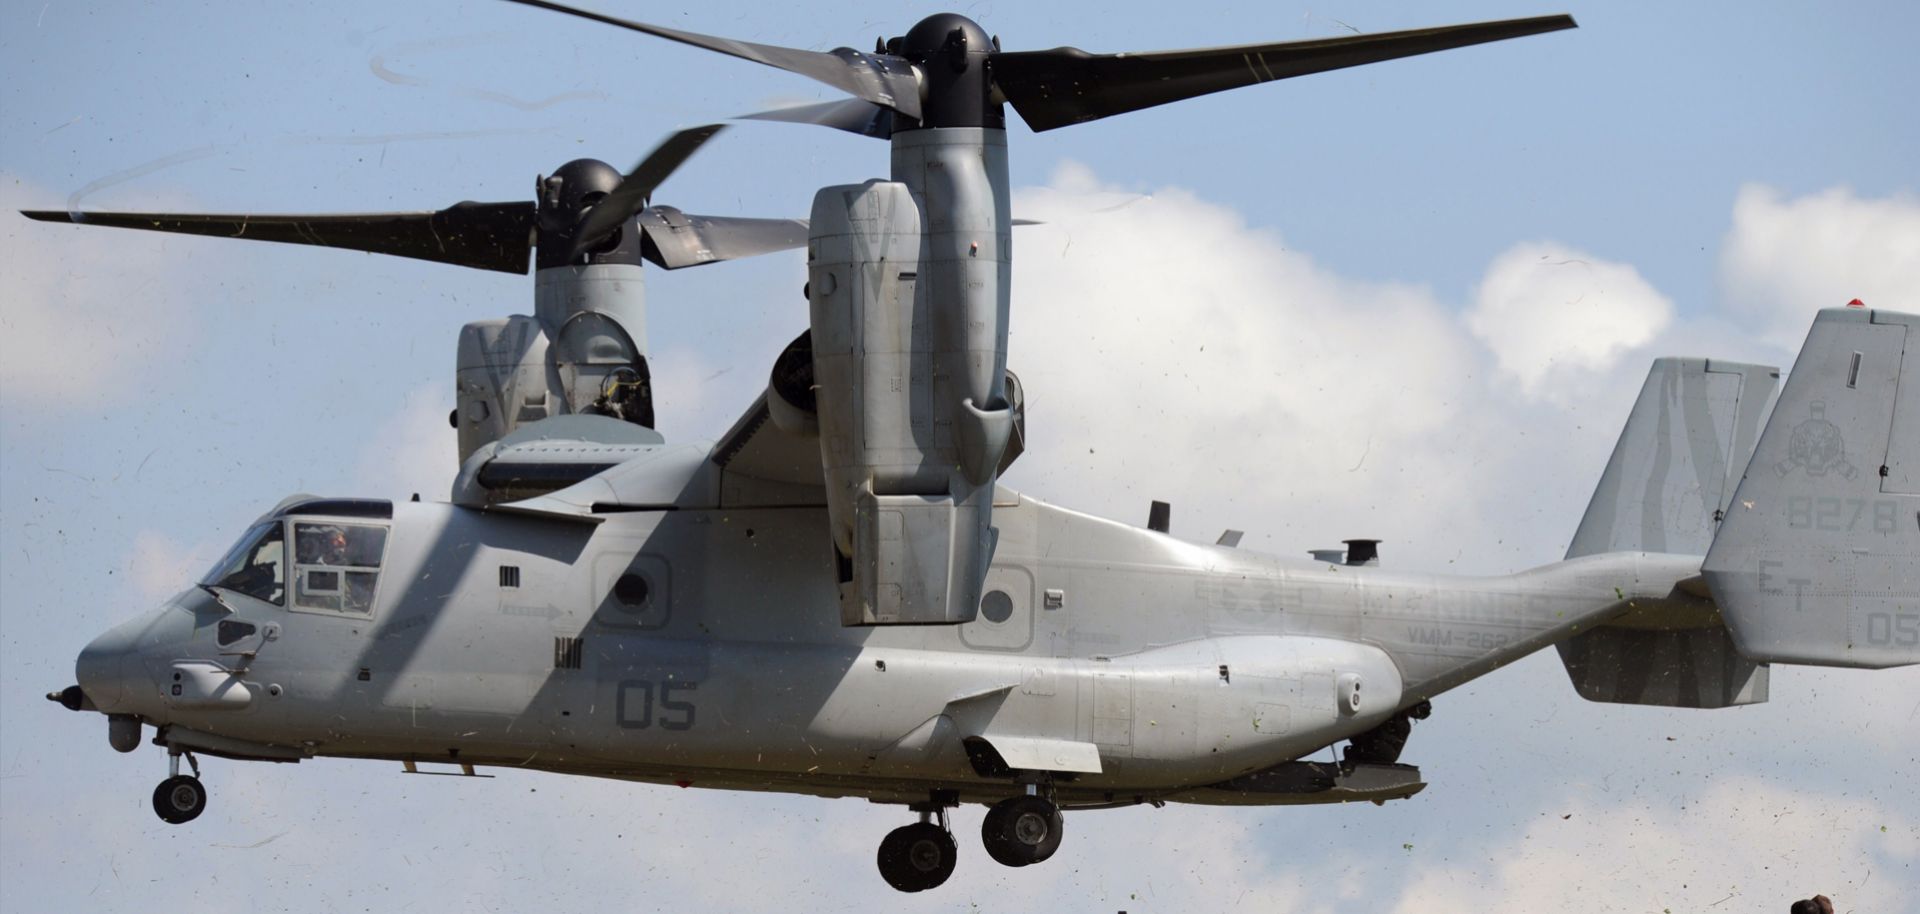 The hallmark of the V-22 Osprey's design is twin tilt rotors suspended at the ends of a central fixed wing.